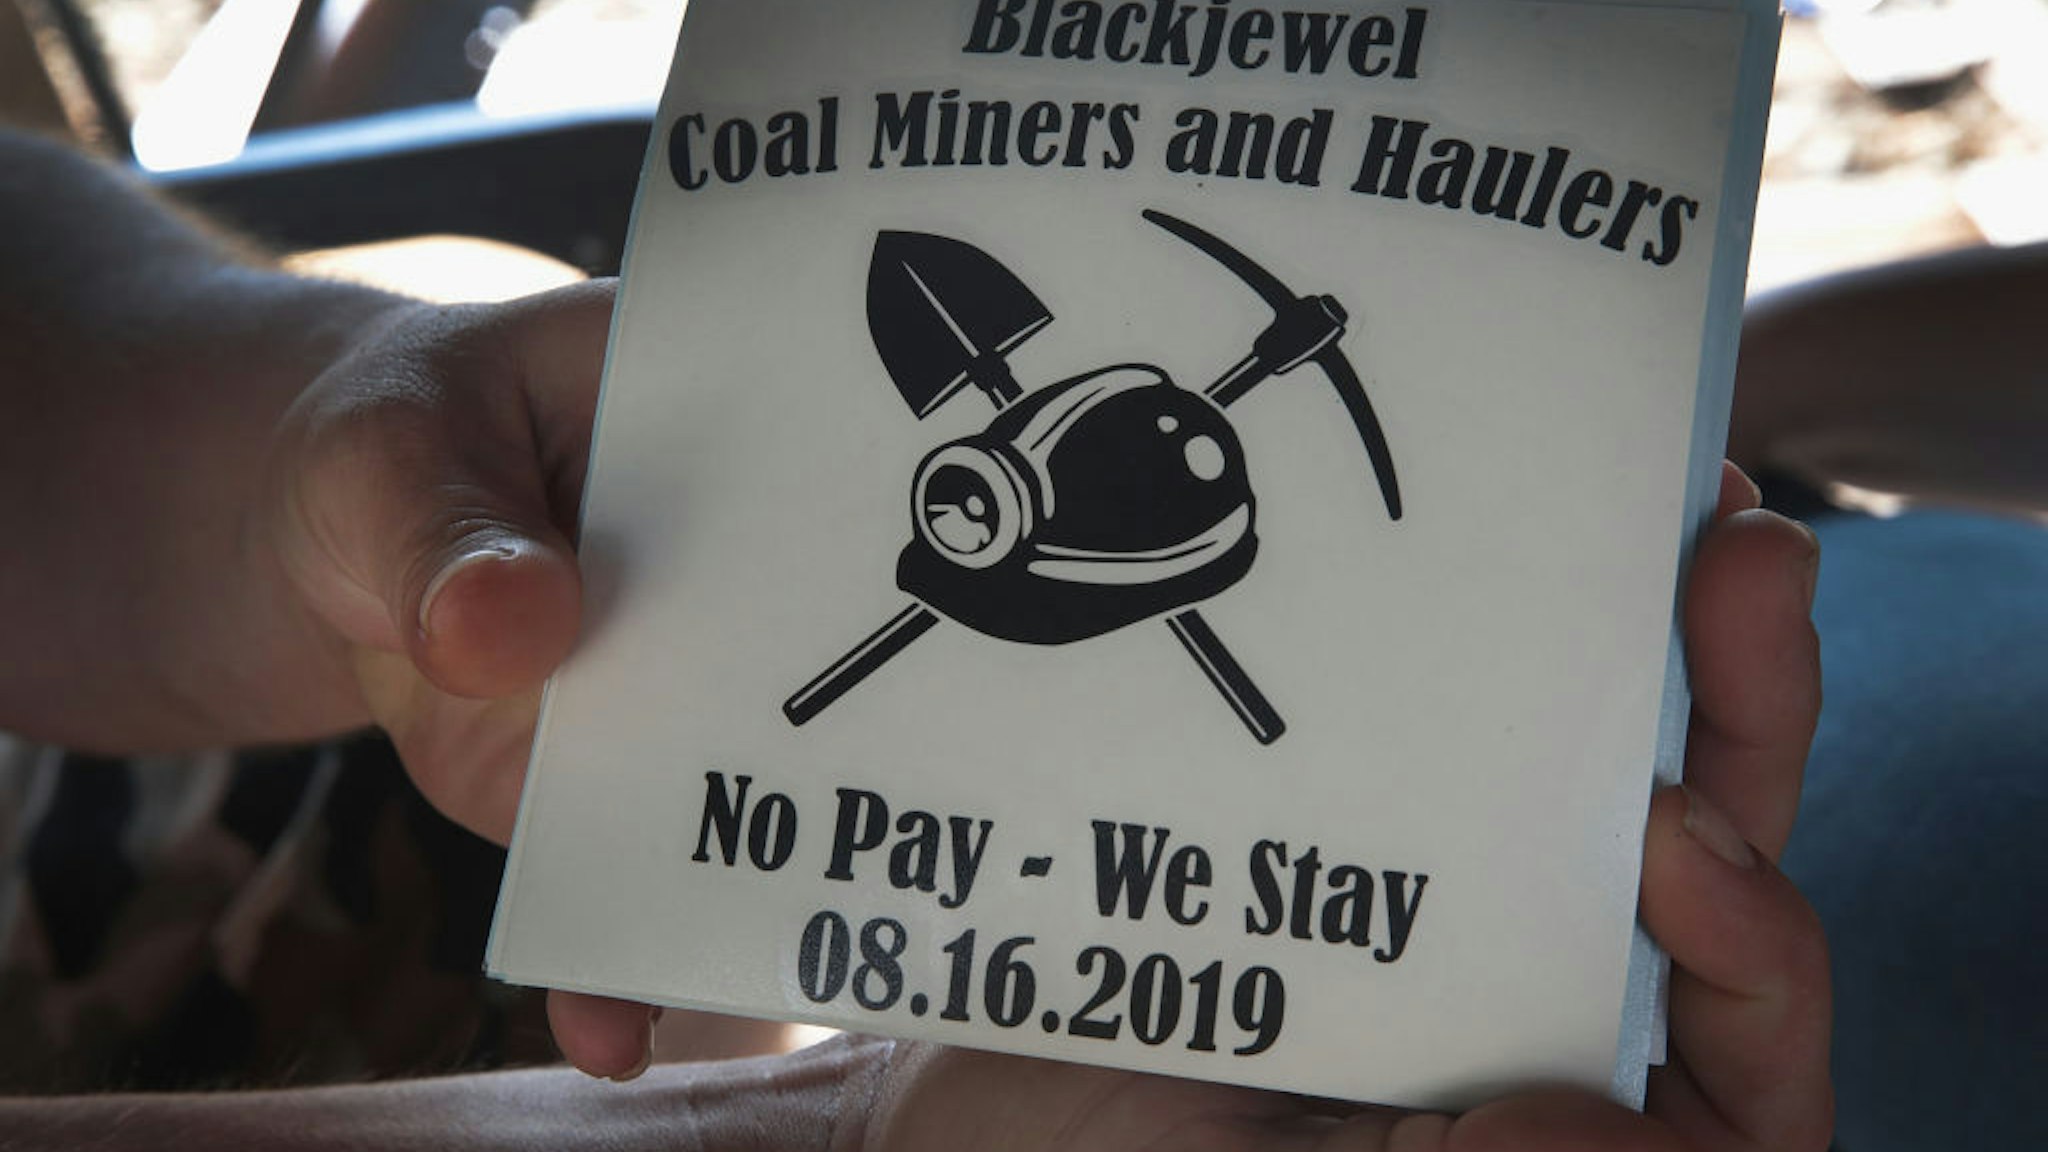 CUMBERLAND, KENTUCKY - AUGUST 24: Chris Rowe, an unemployed Blackjewel coal miner, shows off stickers that were made for the miners while he mans a blockade of the railroad tracks that lead to the mine where he once worked on August 24, 2019 in Cumberland, Kentucky. More than 300 miners in Harlan County unexpectedly found themselves unemployed when Blackjewel declared bankruptcy and shut down their mining operations.